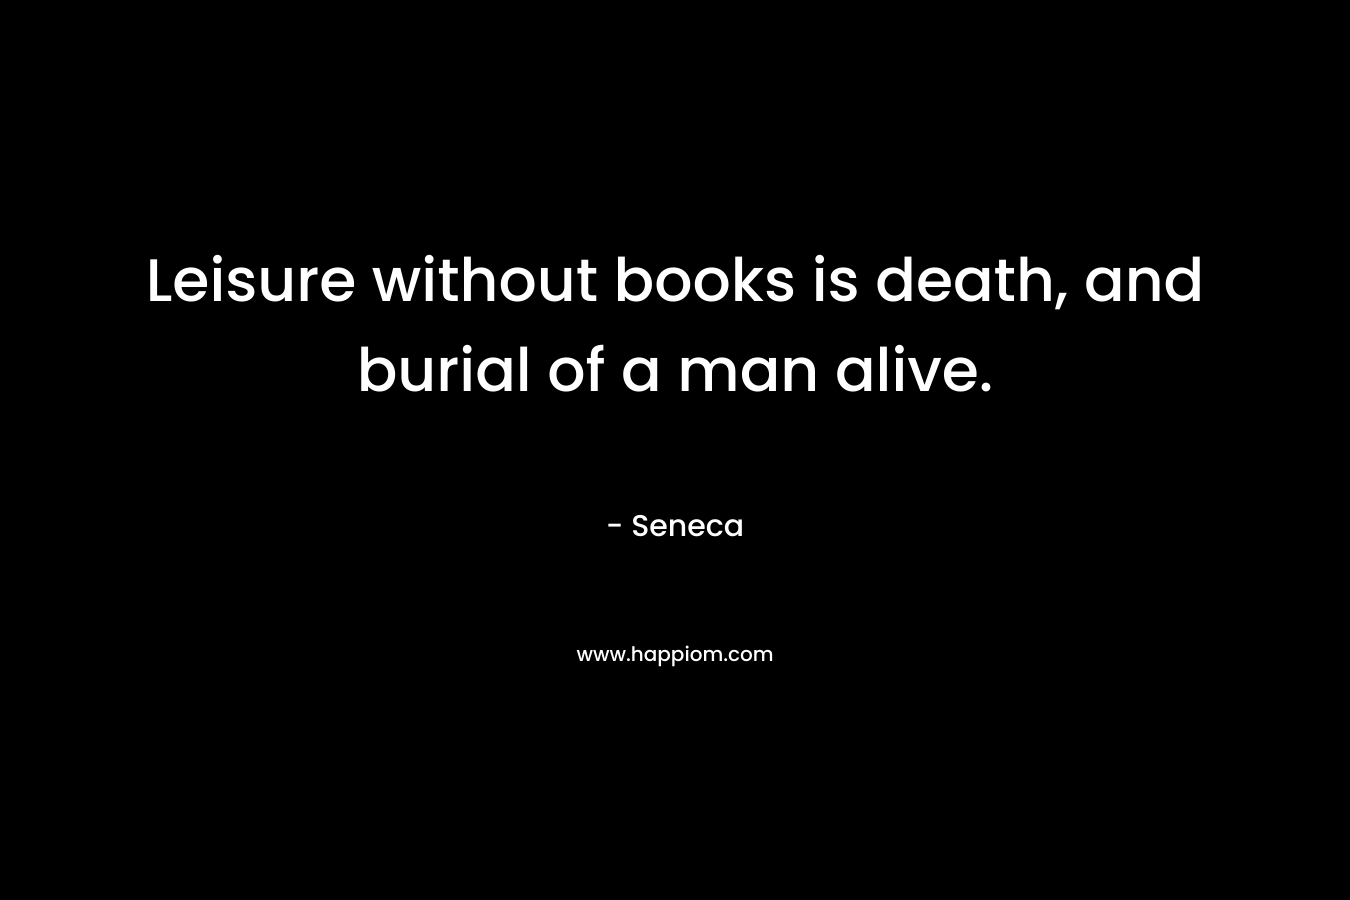 Leisure without books is death, and burial of a man alive.